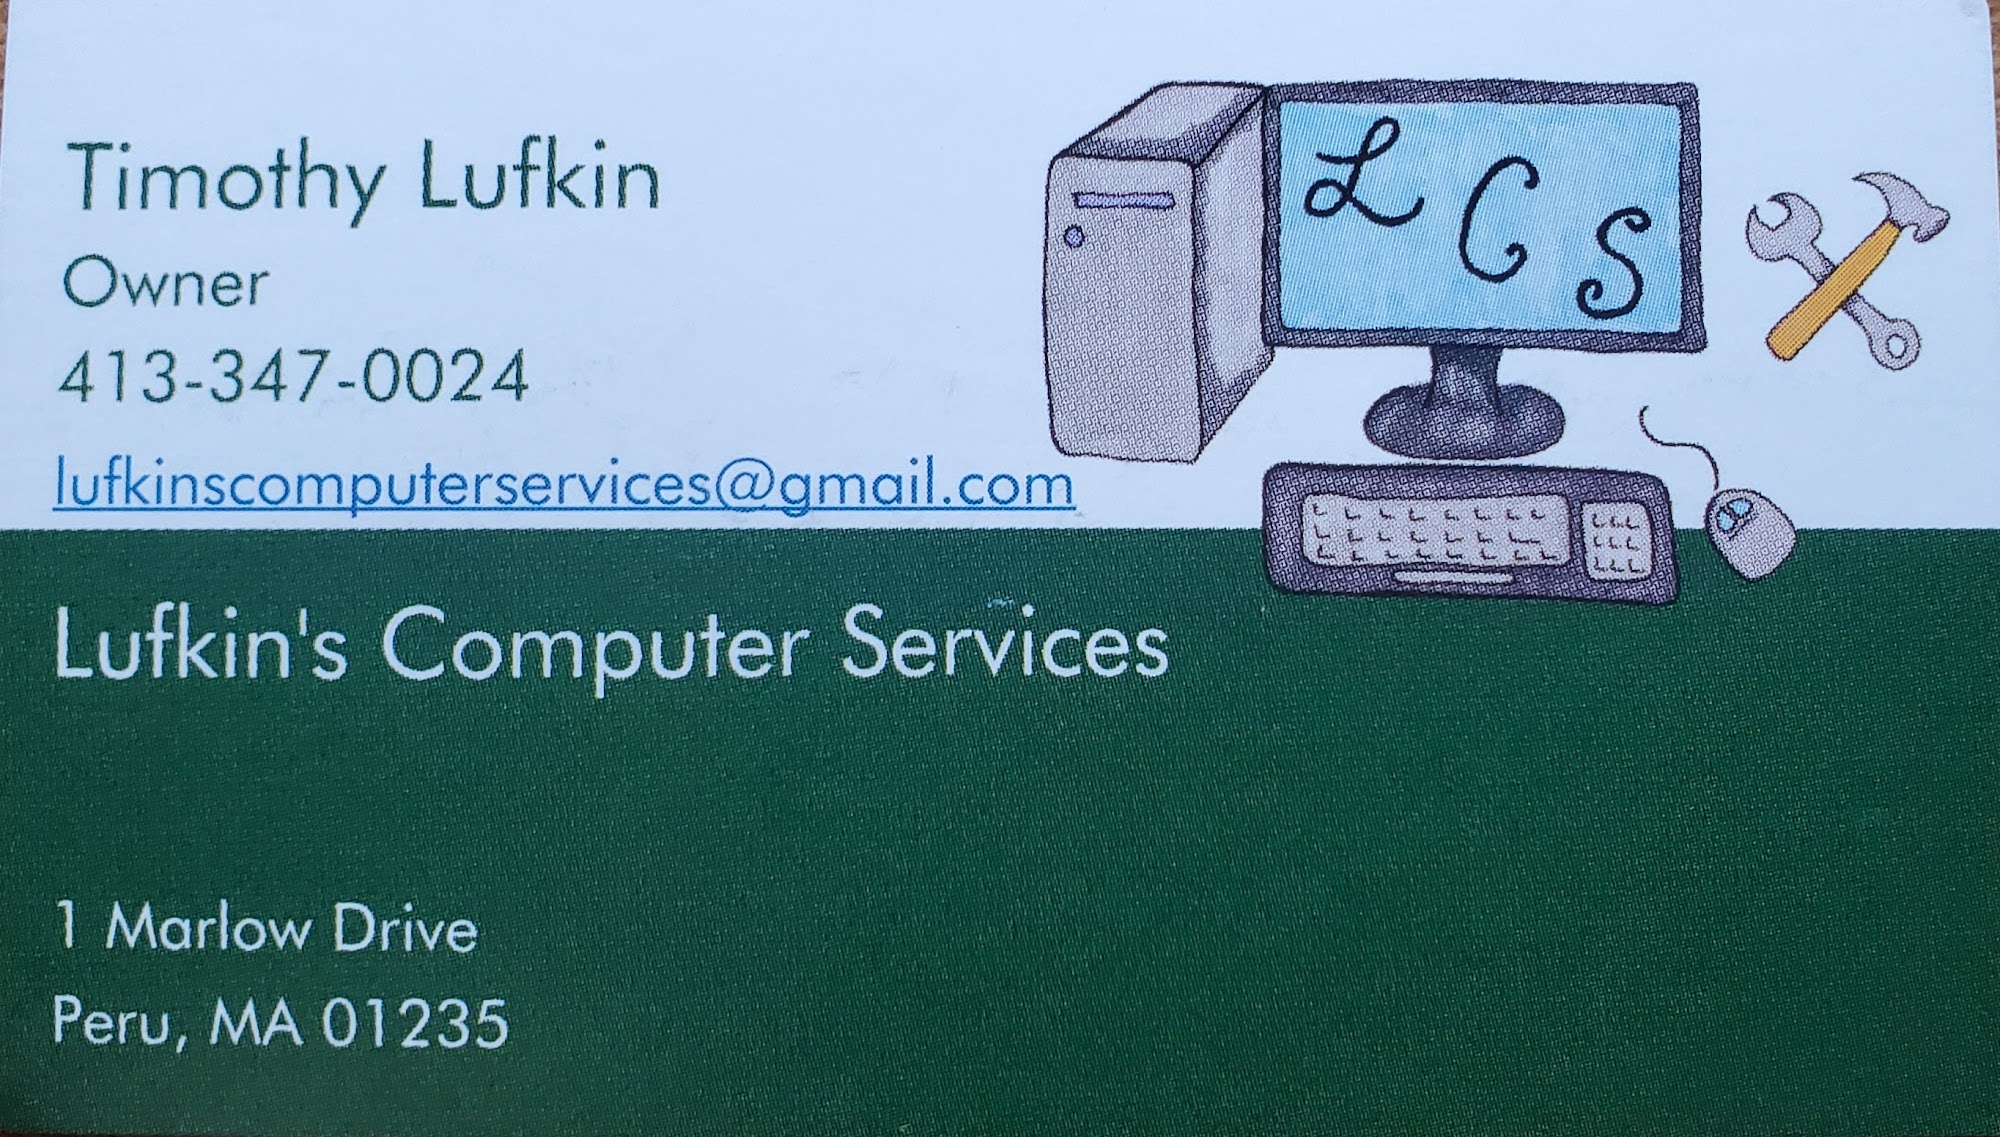 Lufkin's Computer Services Holmes Rd, Hinsdale Massachusetts 01235